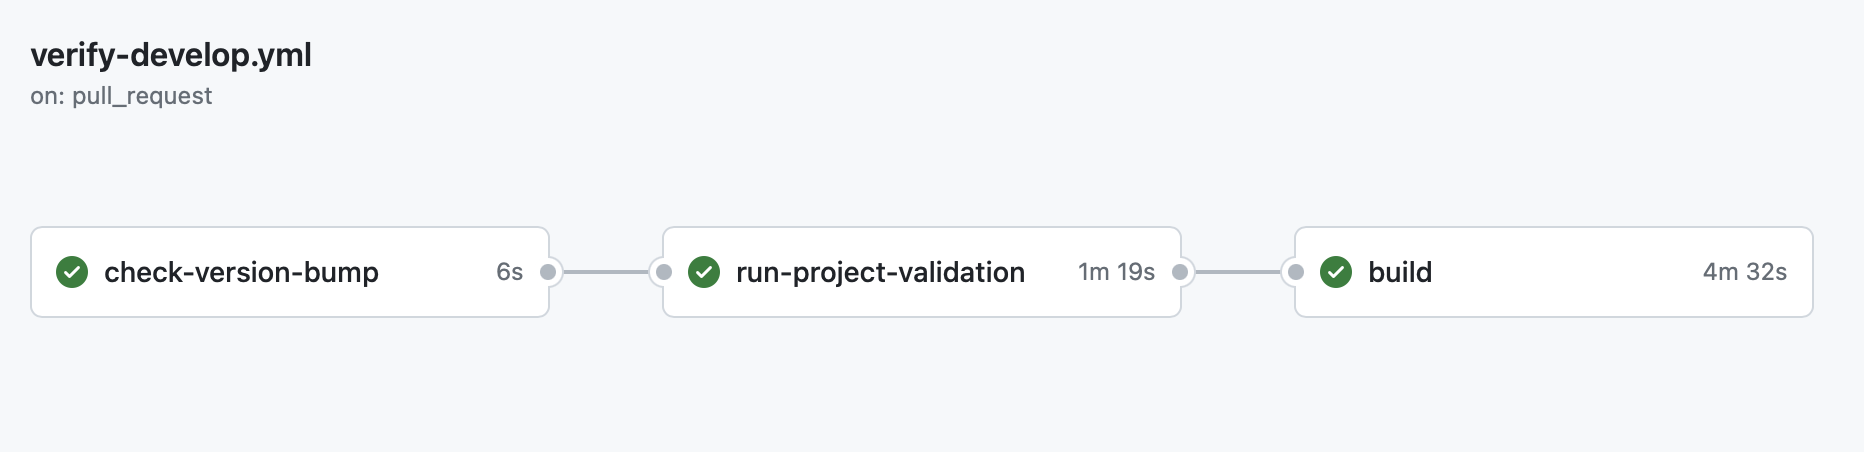 GitHub Actions verify-develop workflow run